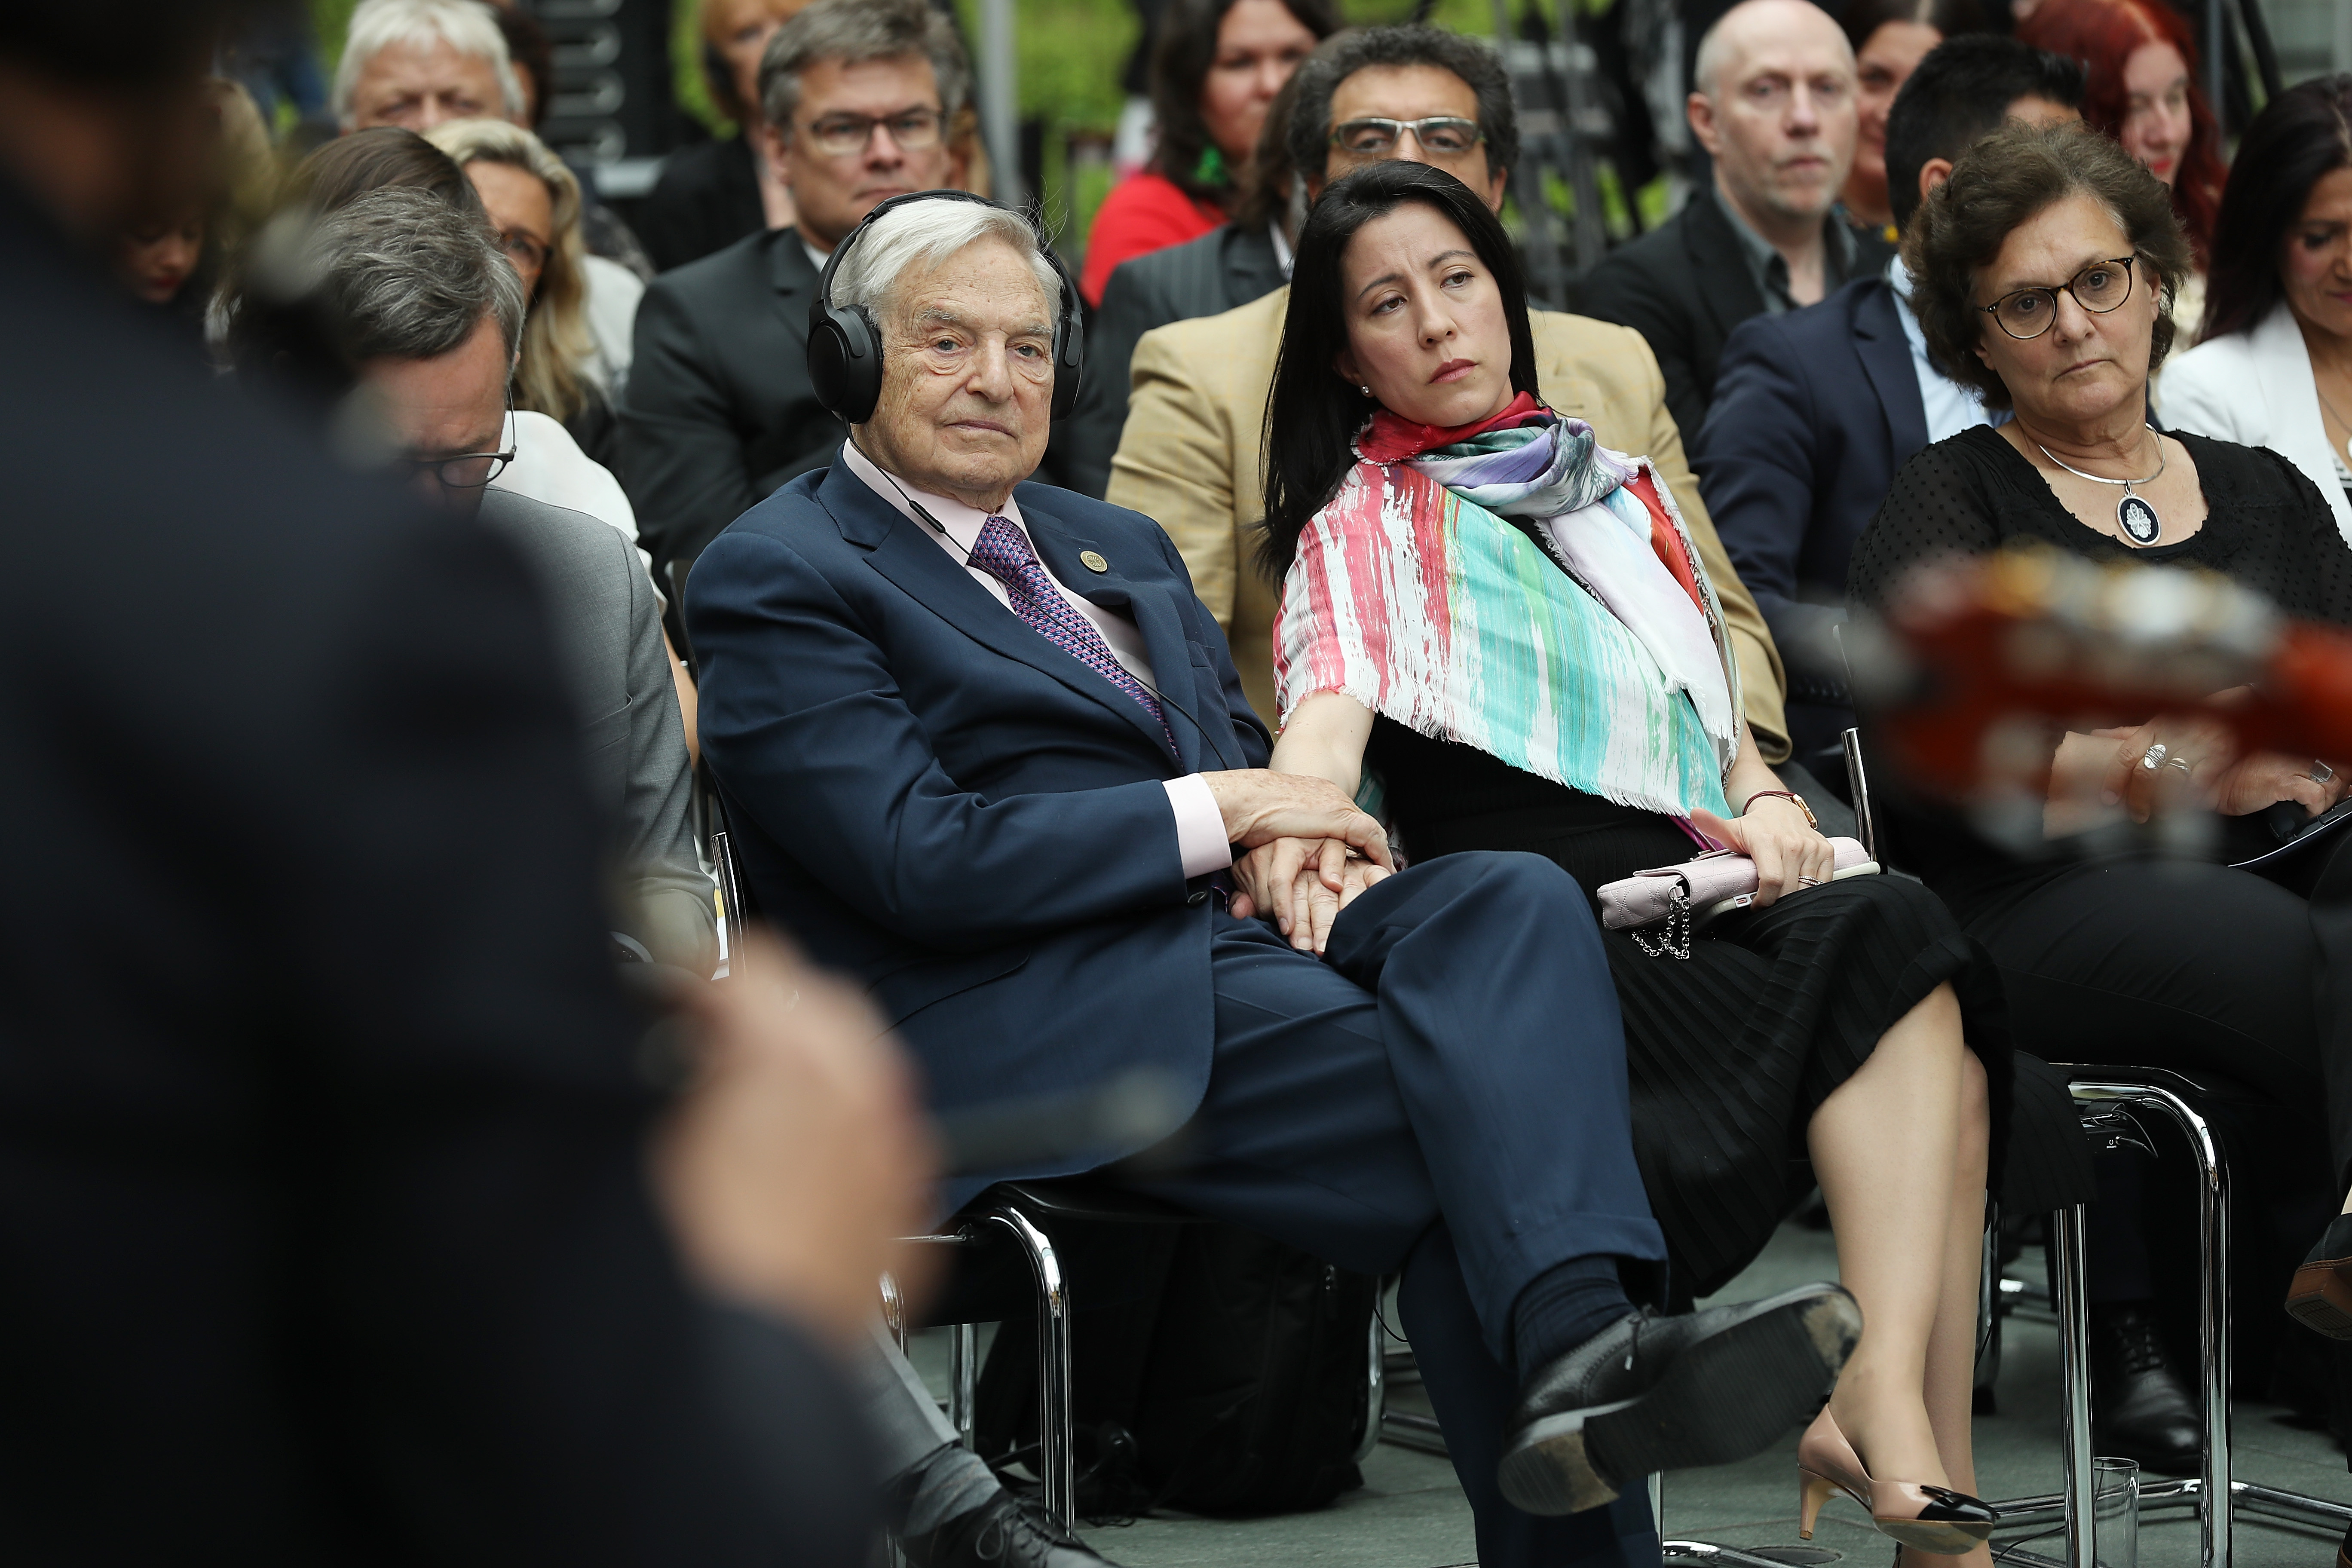 BERLIN, GERMANY - JUNE 08: Financier and philanthropist George Soros and his wife Tamiko Bolton attend the official opening of the European Roma Institute for Arts and Culture (ERIAC) at the German Foreign Ministry on June 8, 2017 in Berlin, Germany. The Institute, which is an initiative of the European Council, the Open Society Fund and the Alliance for the European Roma Institute for Arts and Culture, will have an administrative office in Berlin, gallery space in Venice and a liaison office in Brussels. (Photo by Sean Gallup/Getty Images)